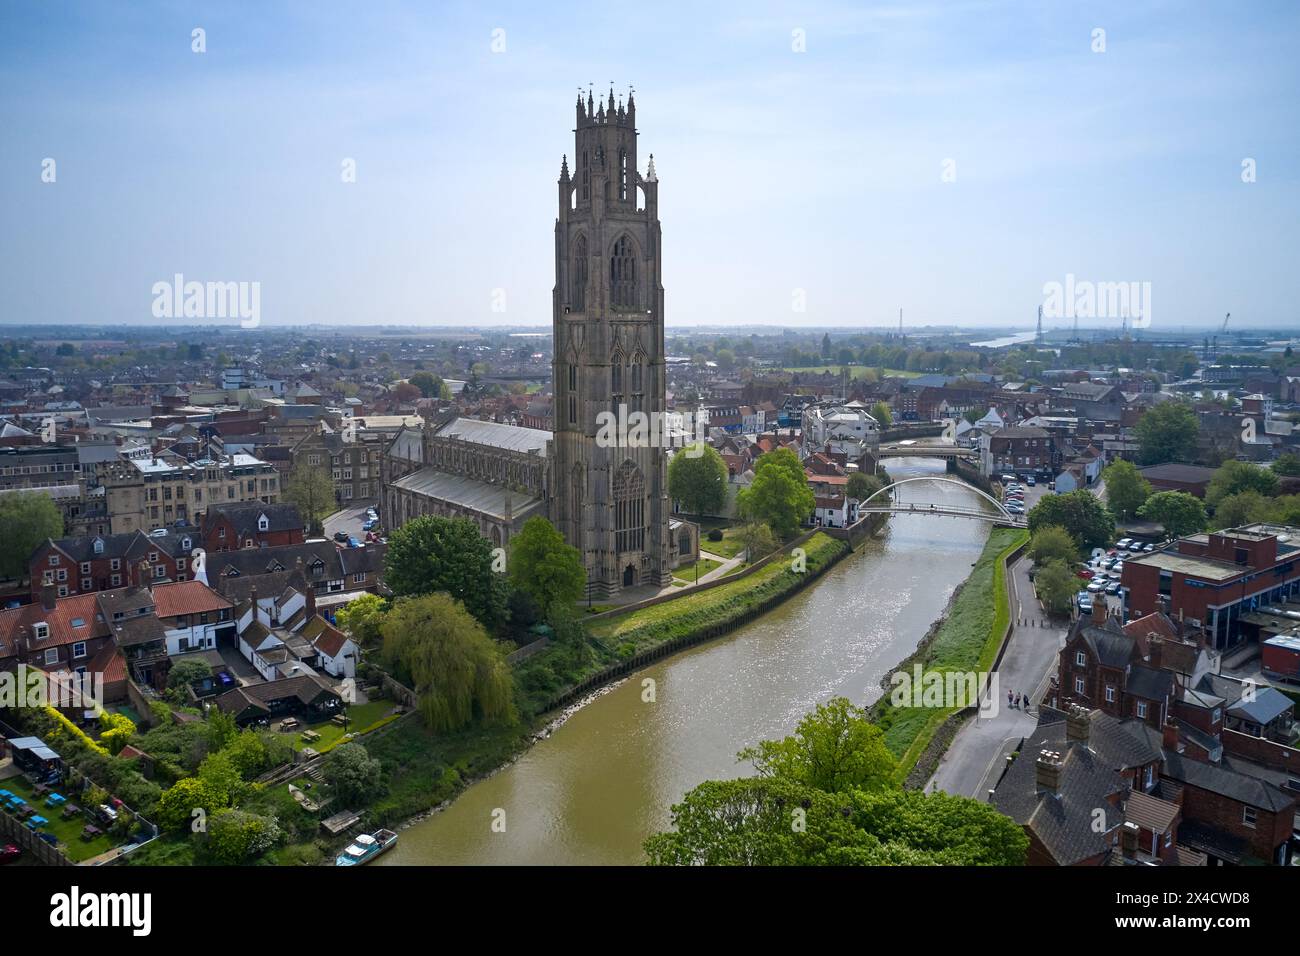 Boston is a market town and inland port in the borough of the same name in the county of Lincolnshire, England.  St Botolph's Church is the Anglican p Stock Photo